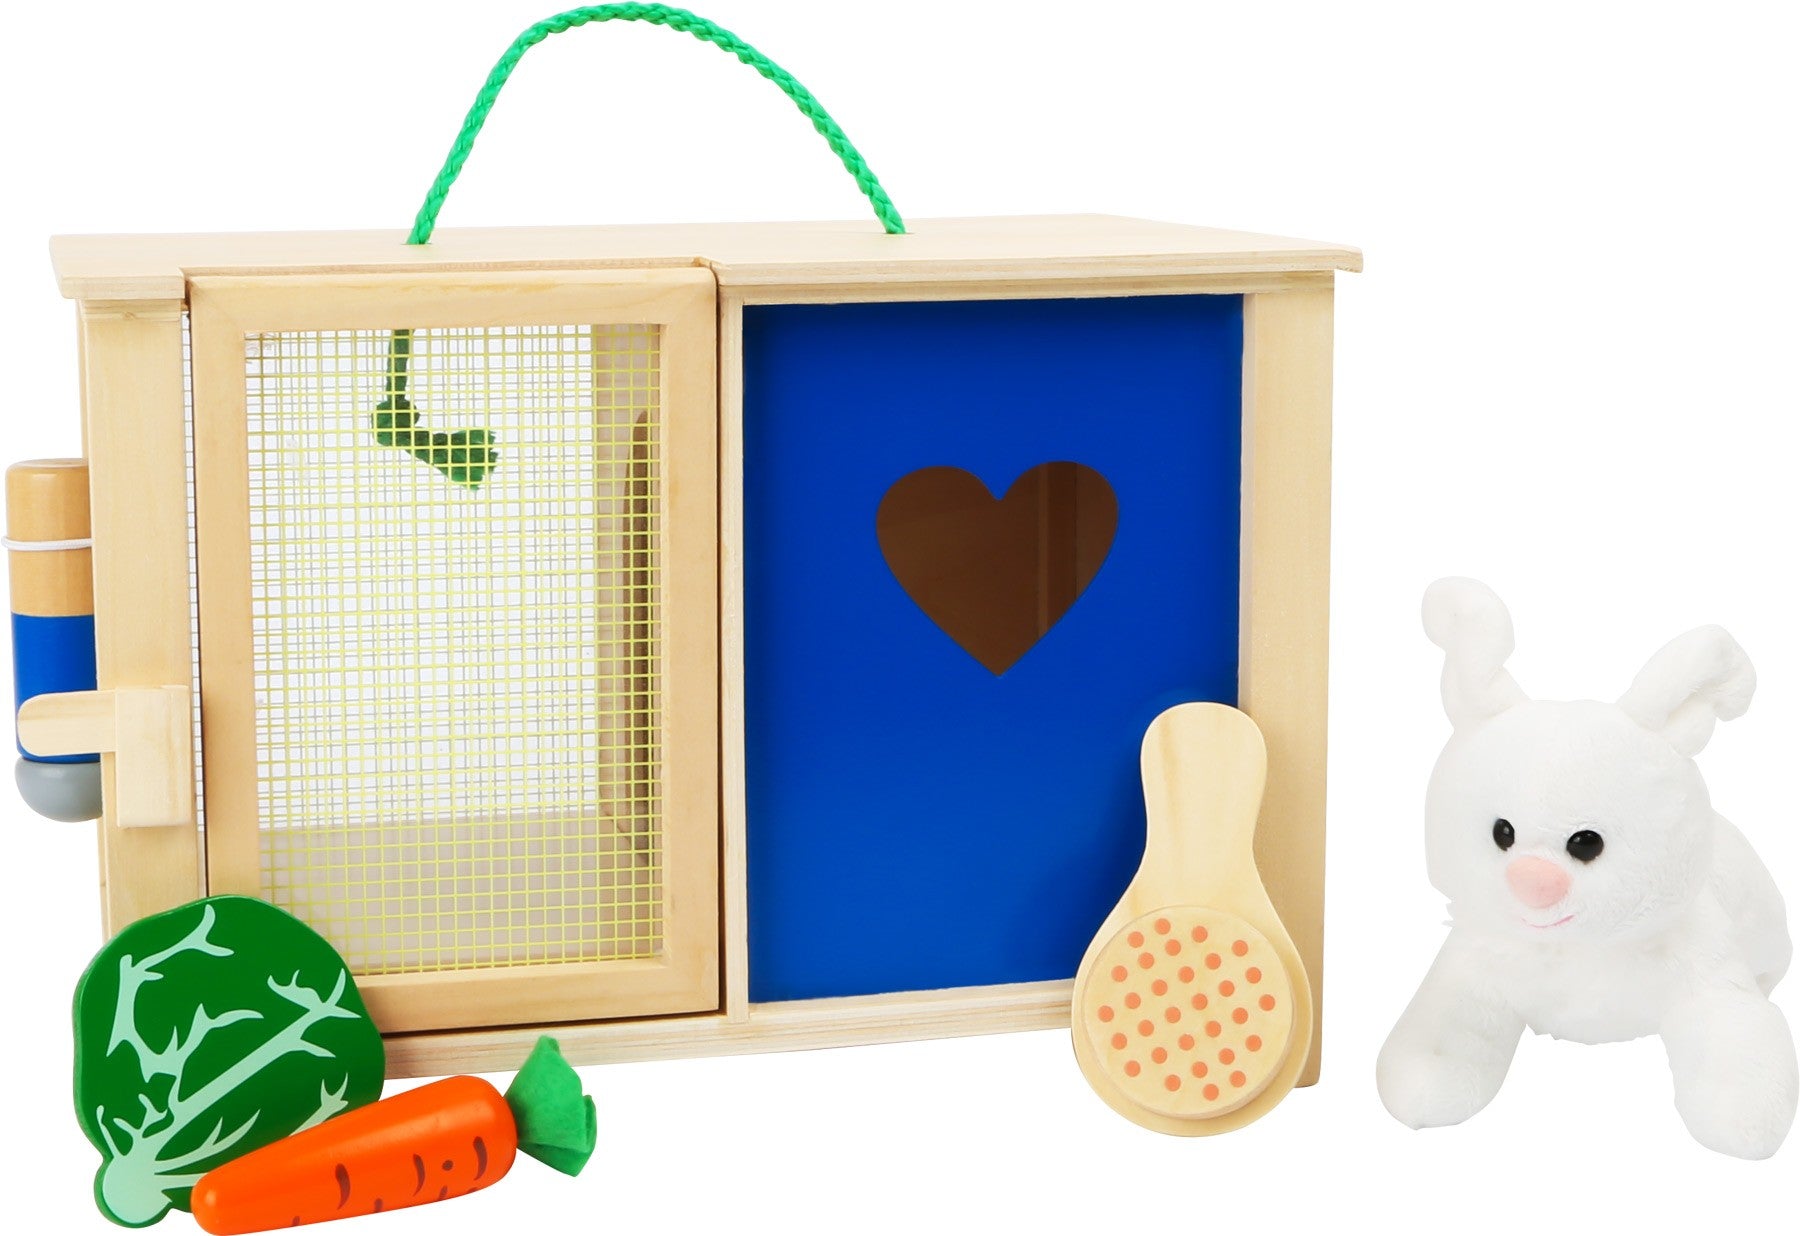 Legler Wooden Bunny and Hutch Play Set